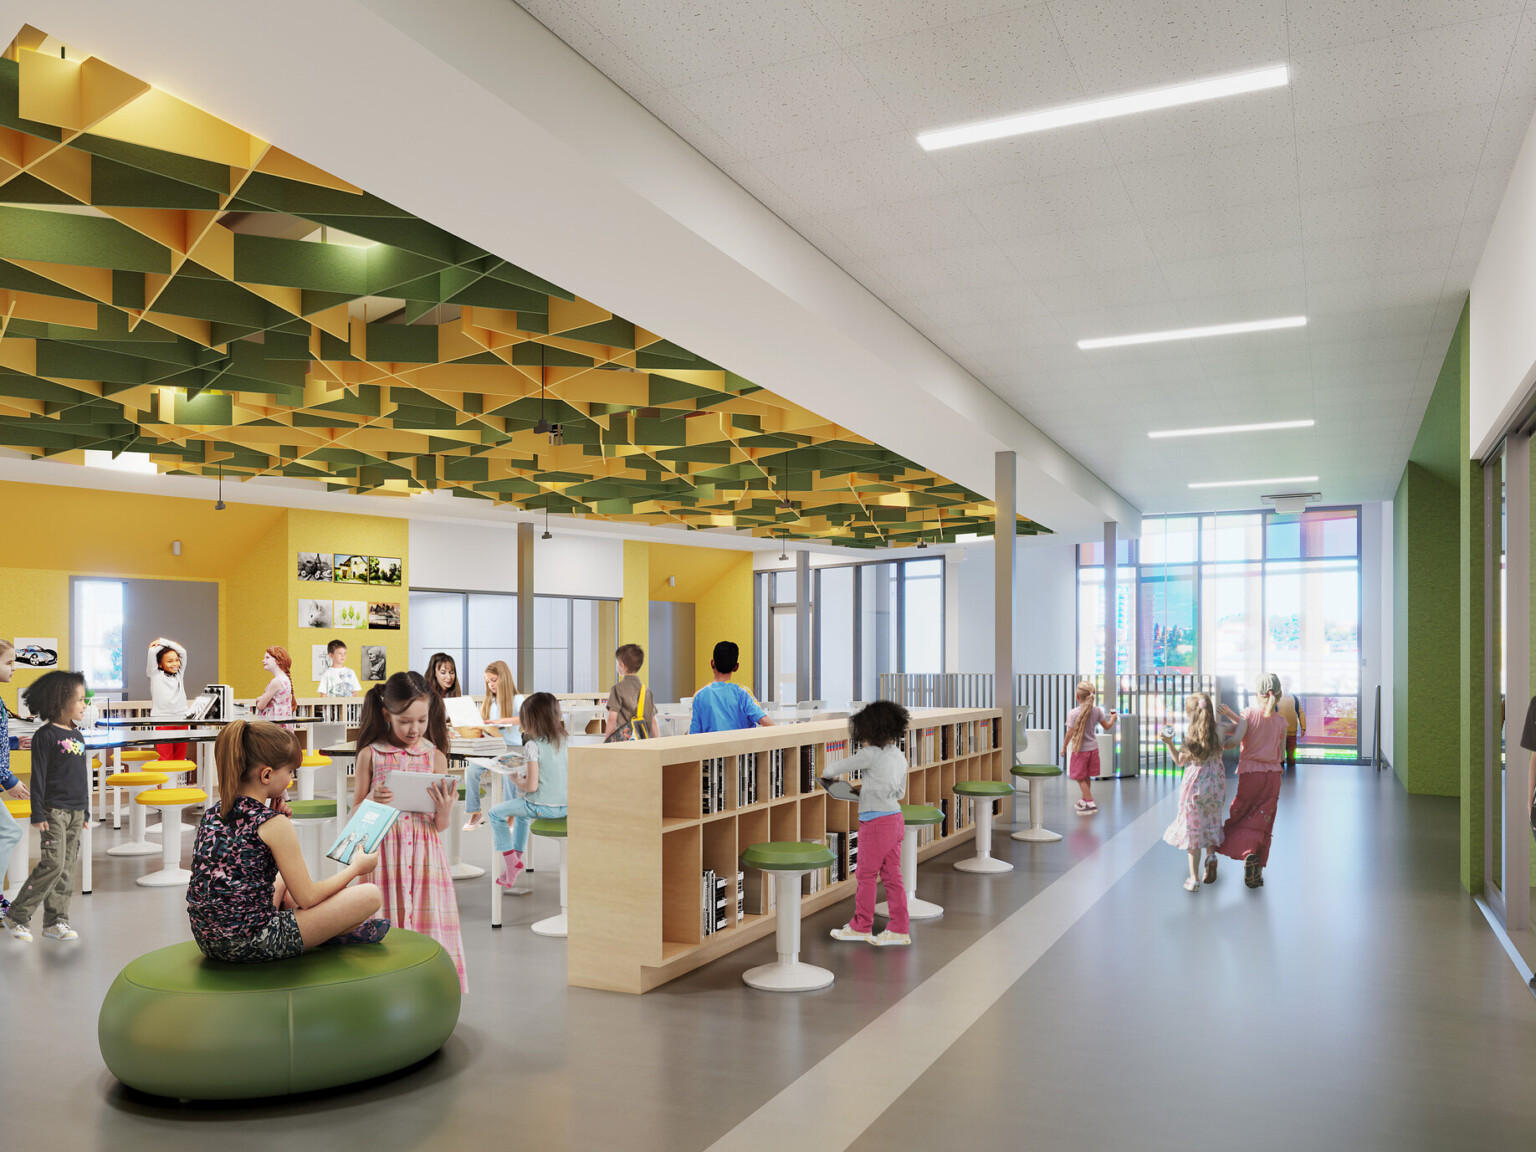 learning area with high ceilings, bright yellow and earthy green color scheme, low book shelves, geometric yellow and green ceiling sculpture, polished concrete flooring, colorful stools, beanbags and white boards throughout